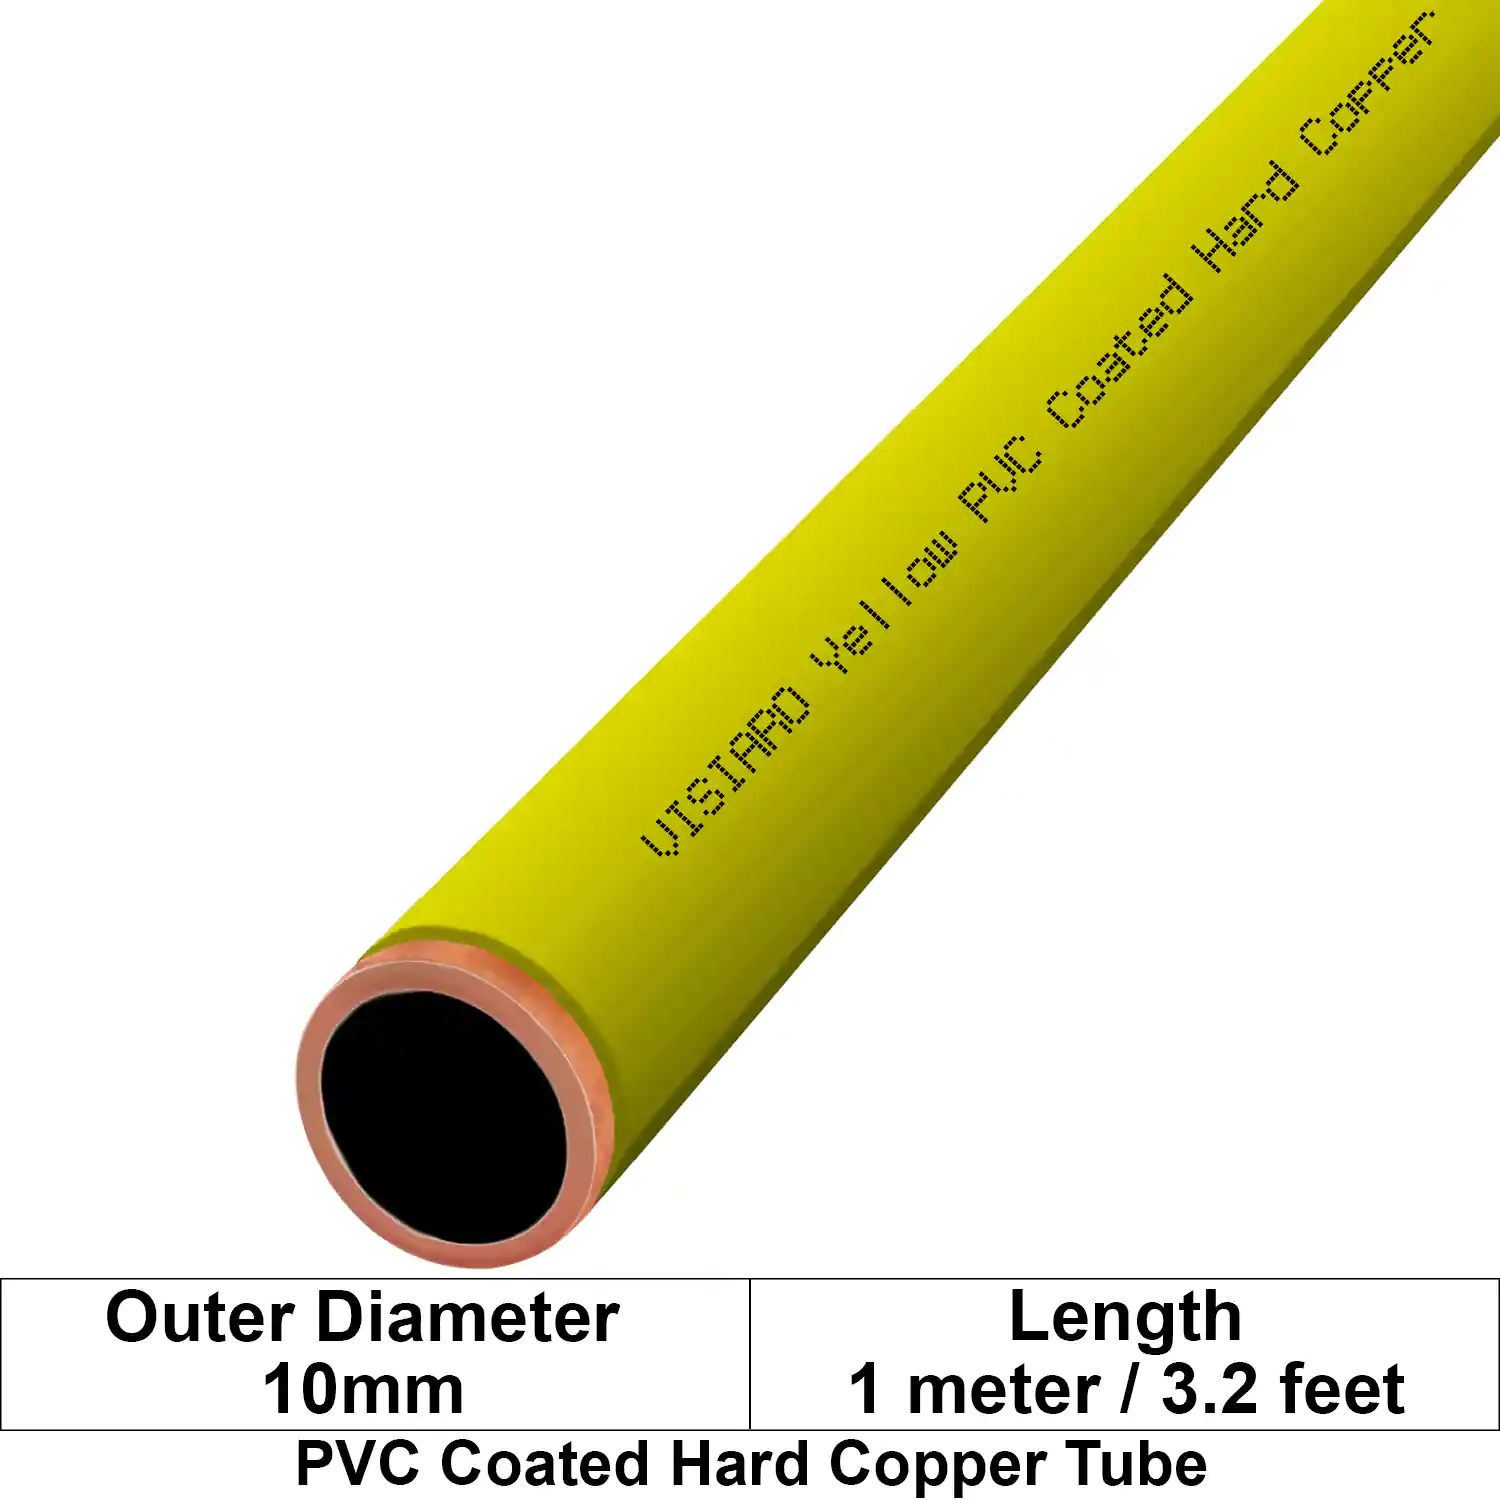 Visiaro Yellow PVC Coated Hard Copper Tube 1mtr long Outer Diameter - 10 mm